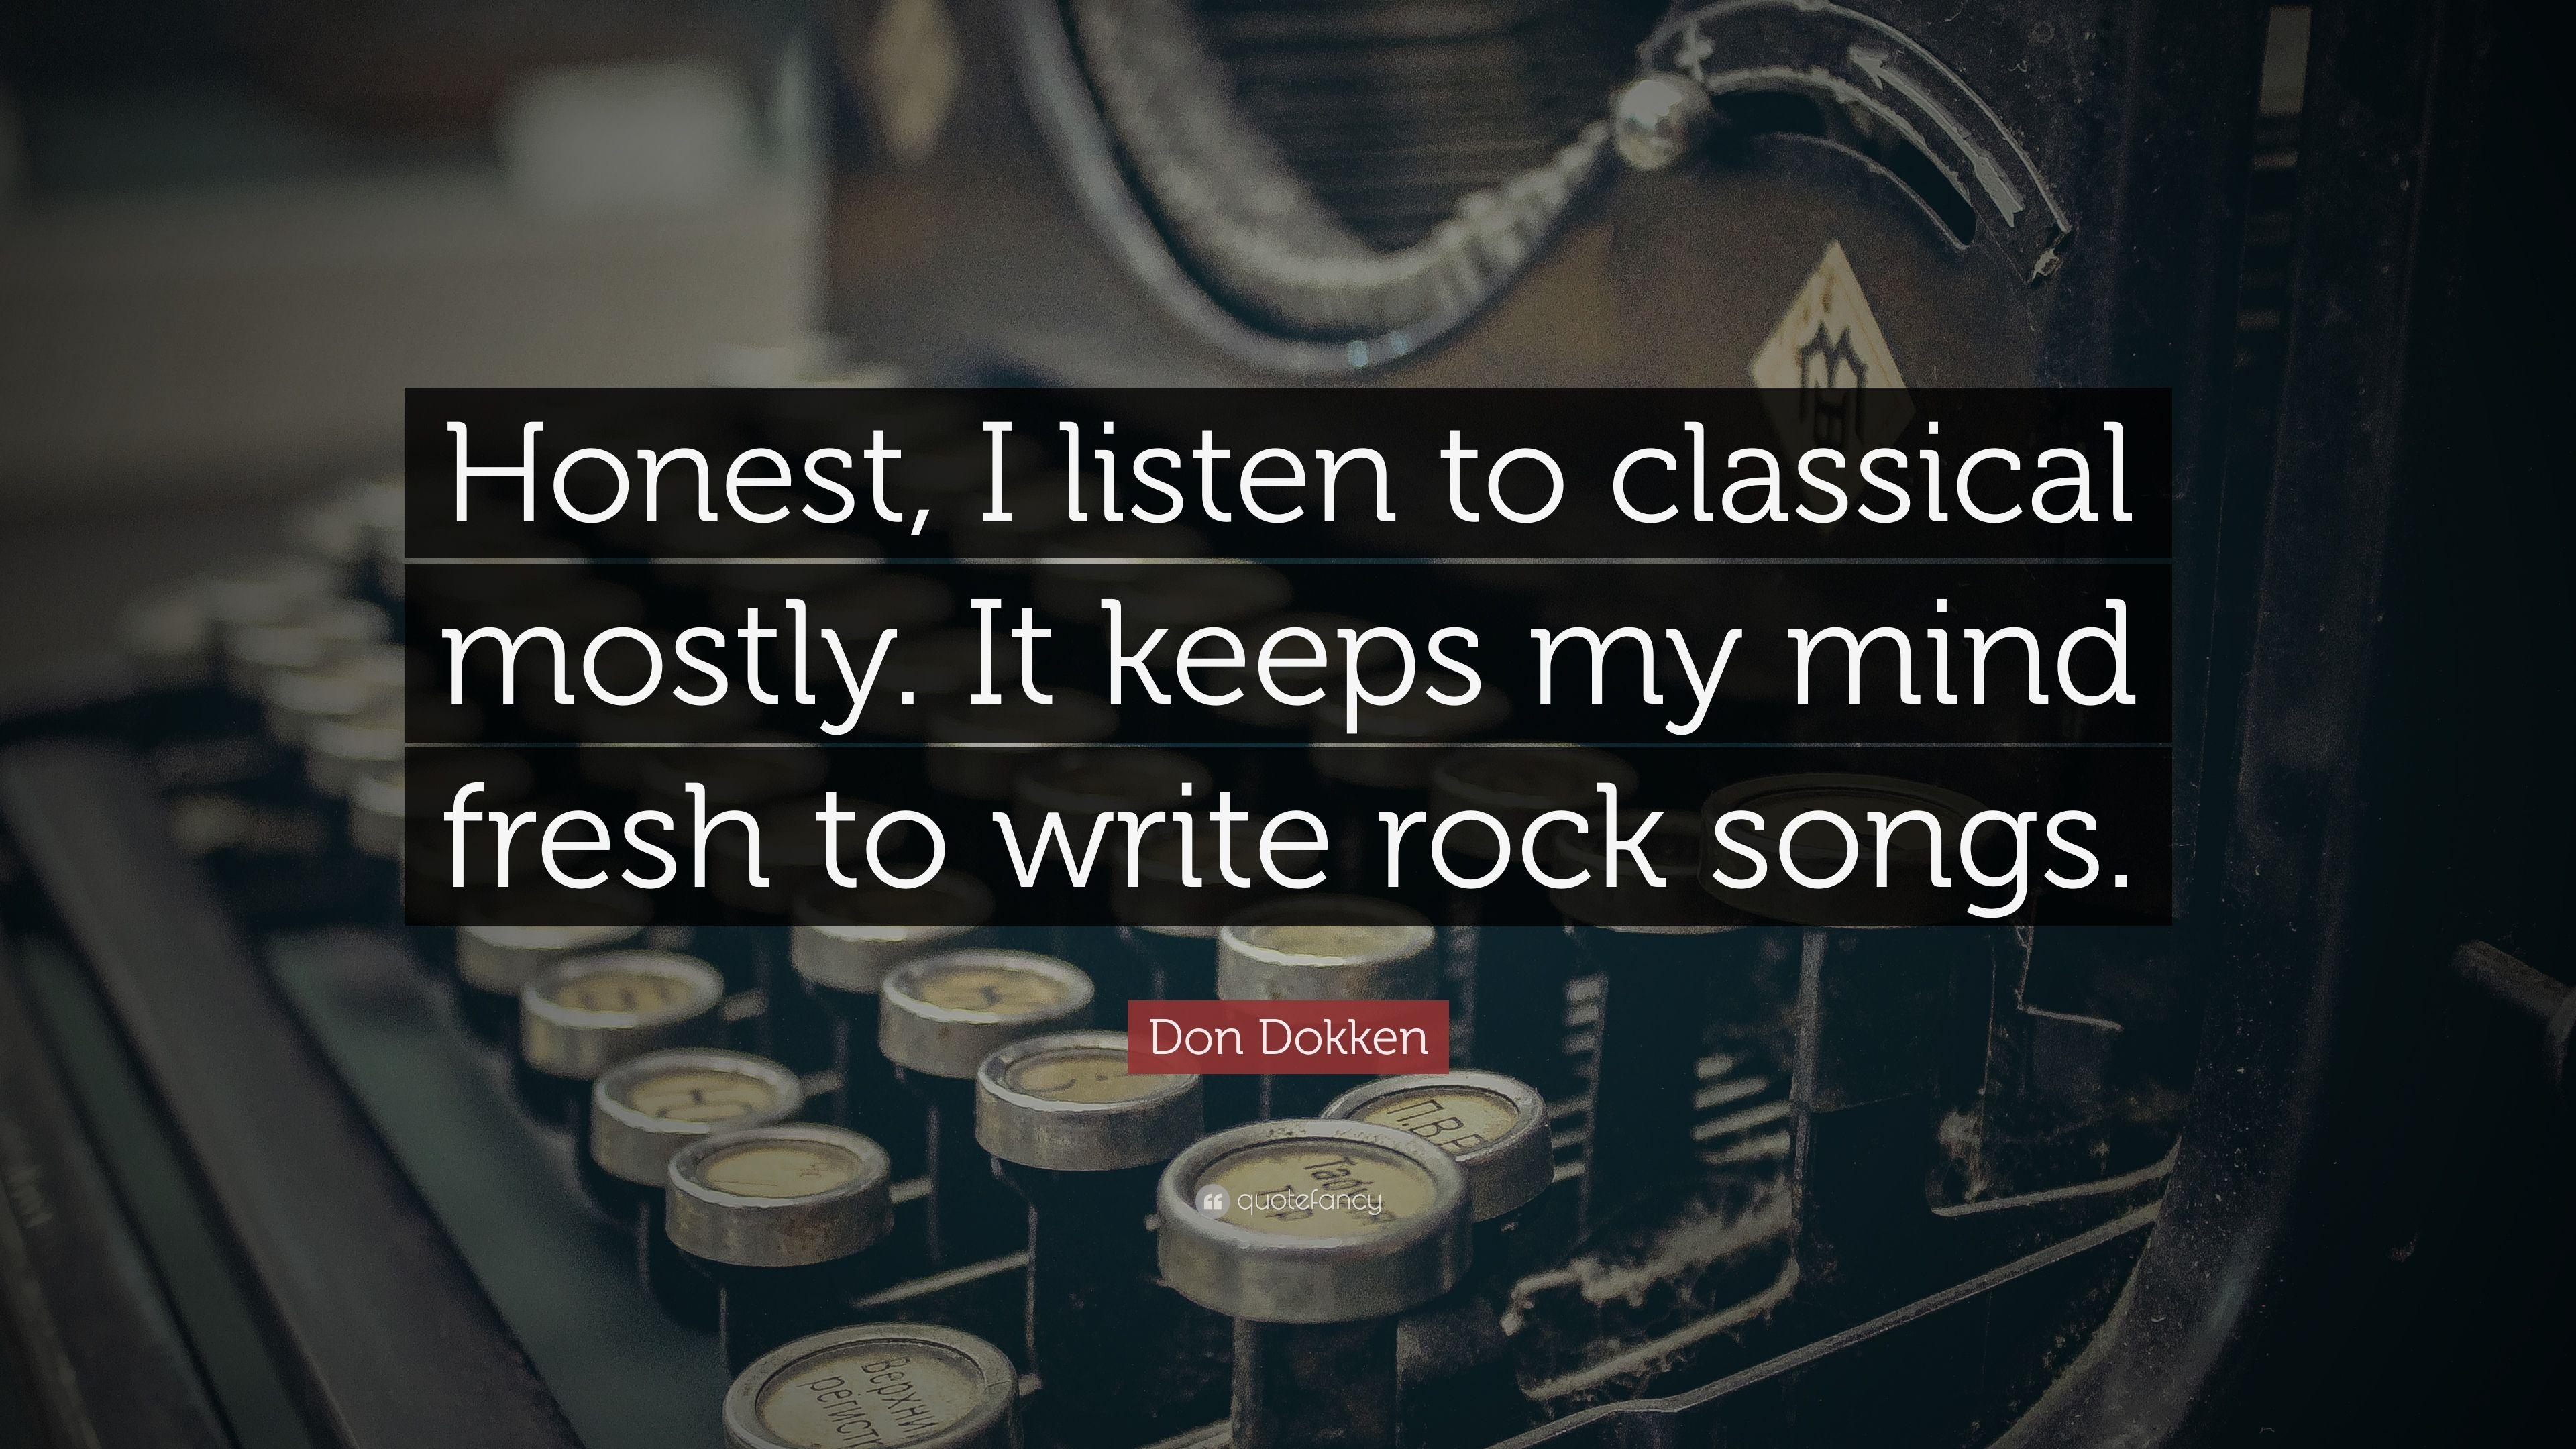 Don Dokken Quote: “Honest, I listen to classical mostly. It keeps